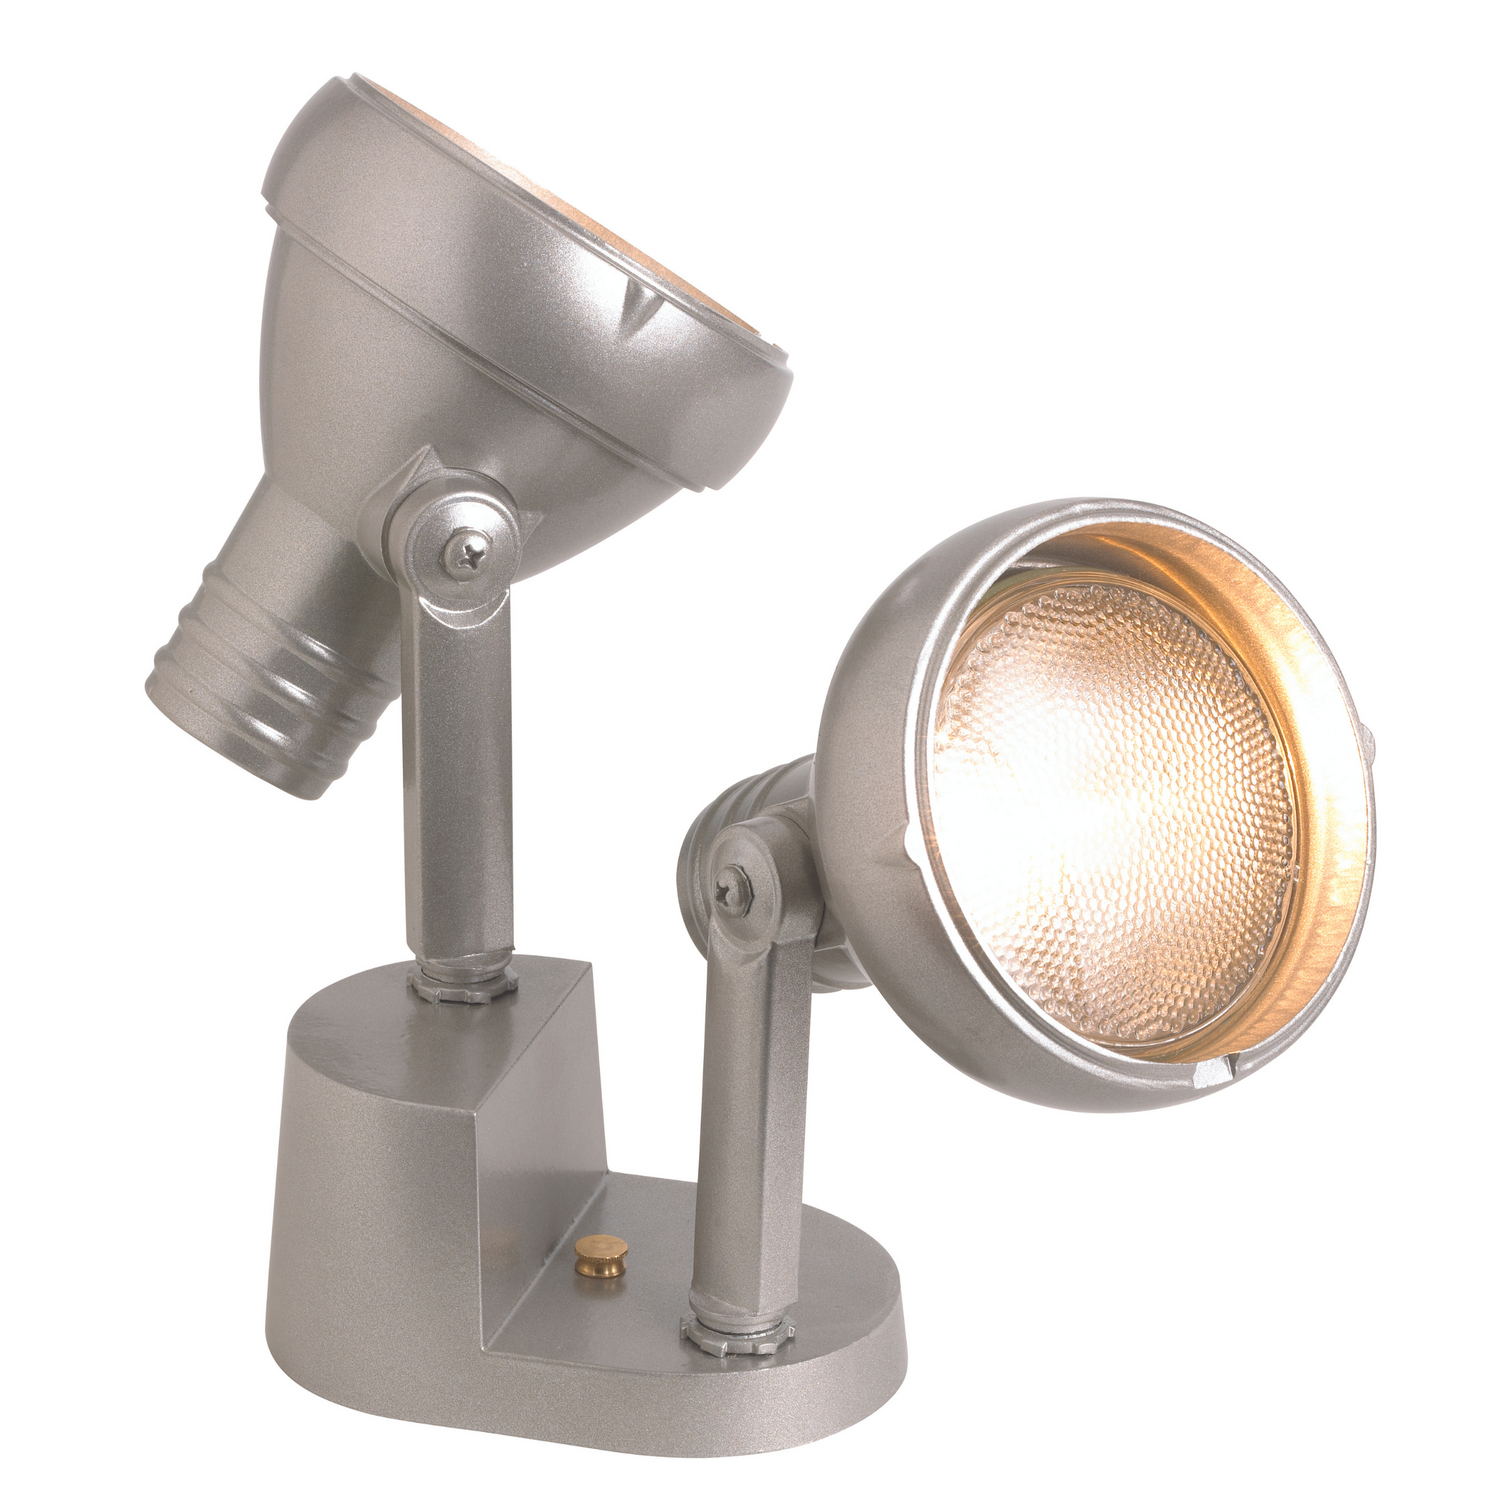 Outdoor double accent light - 0552